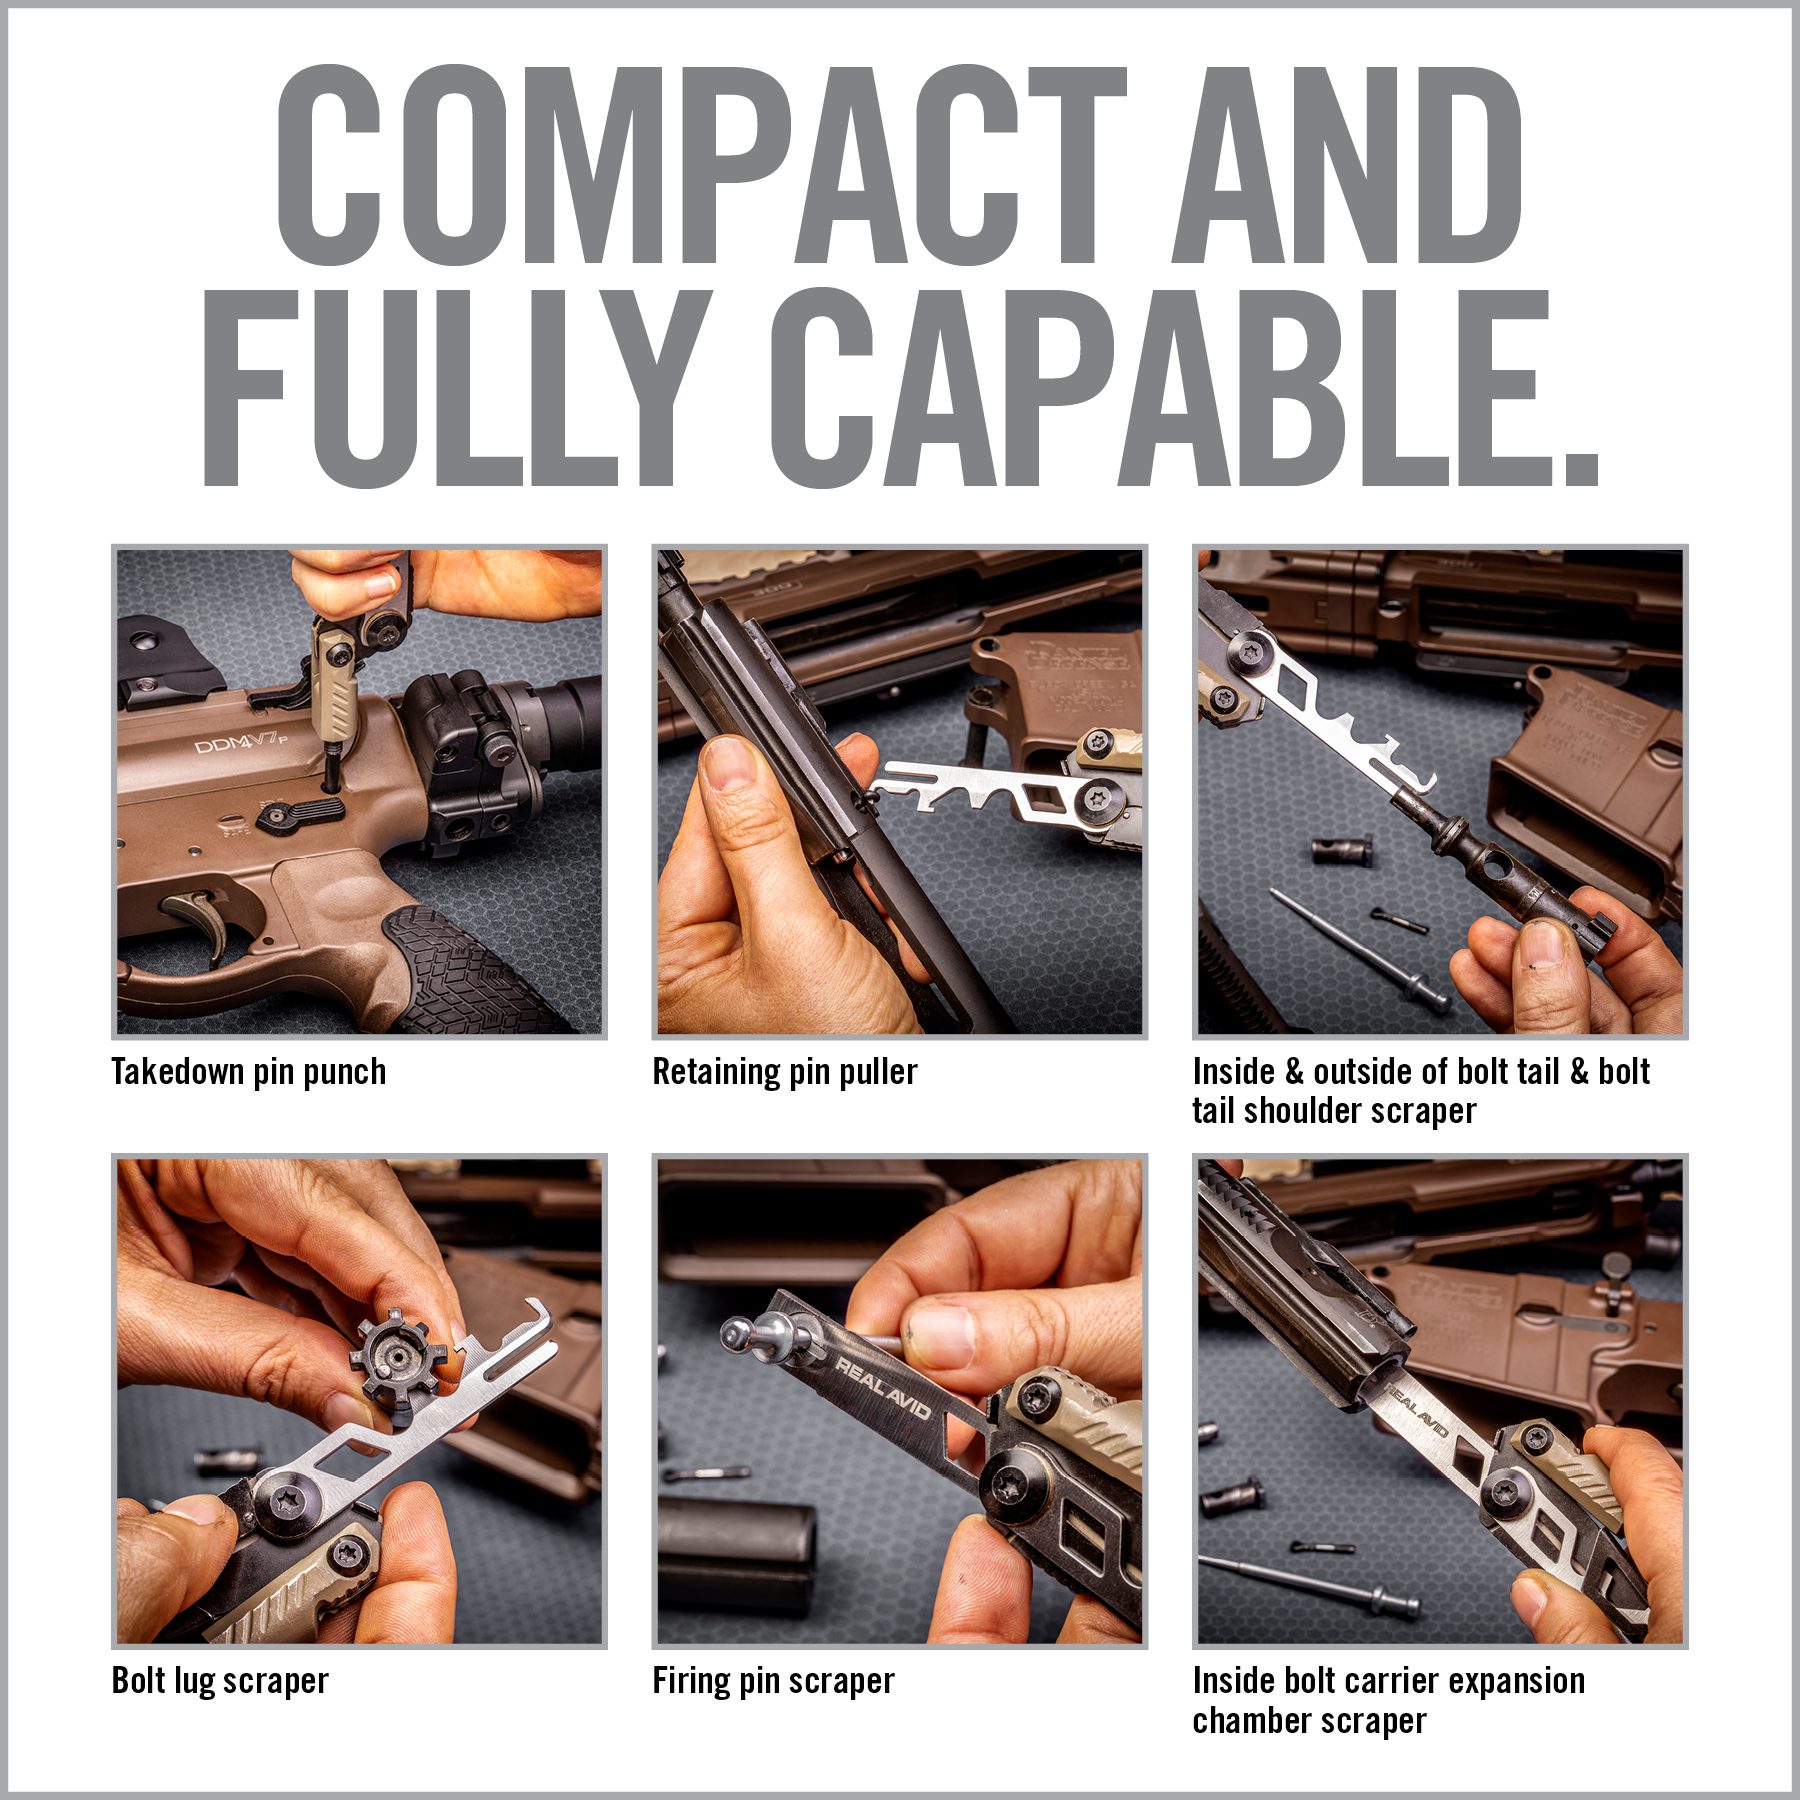 the instructions for how to use a compact and fully capable rifle